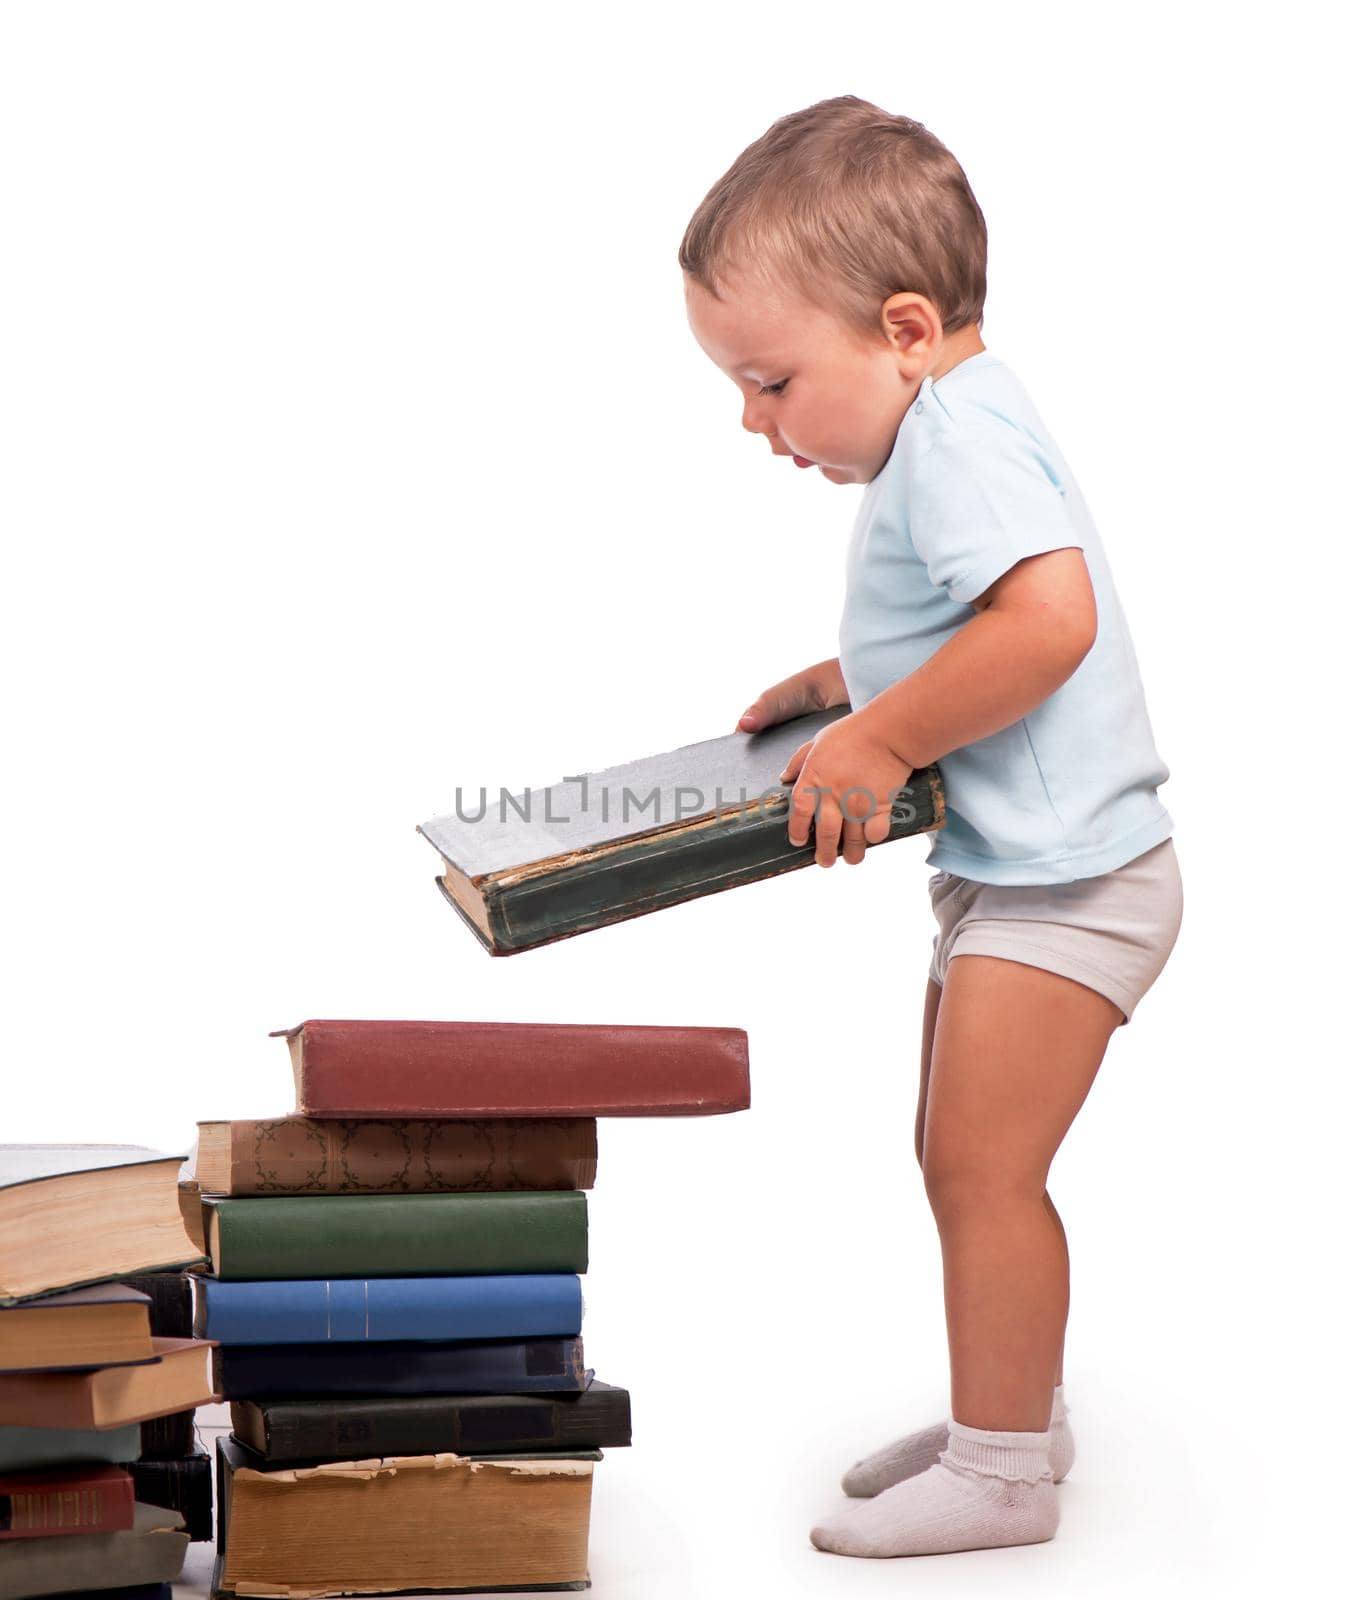 Boy stands near a stack of books for an educational portrait - isolated over white background by aprilphoto